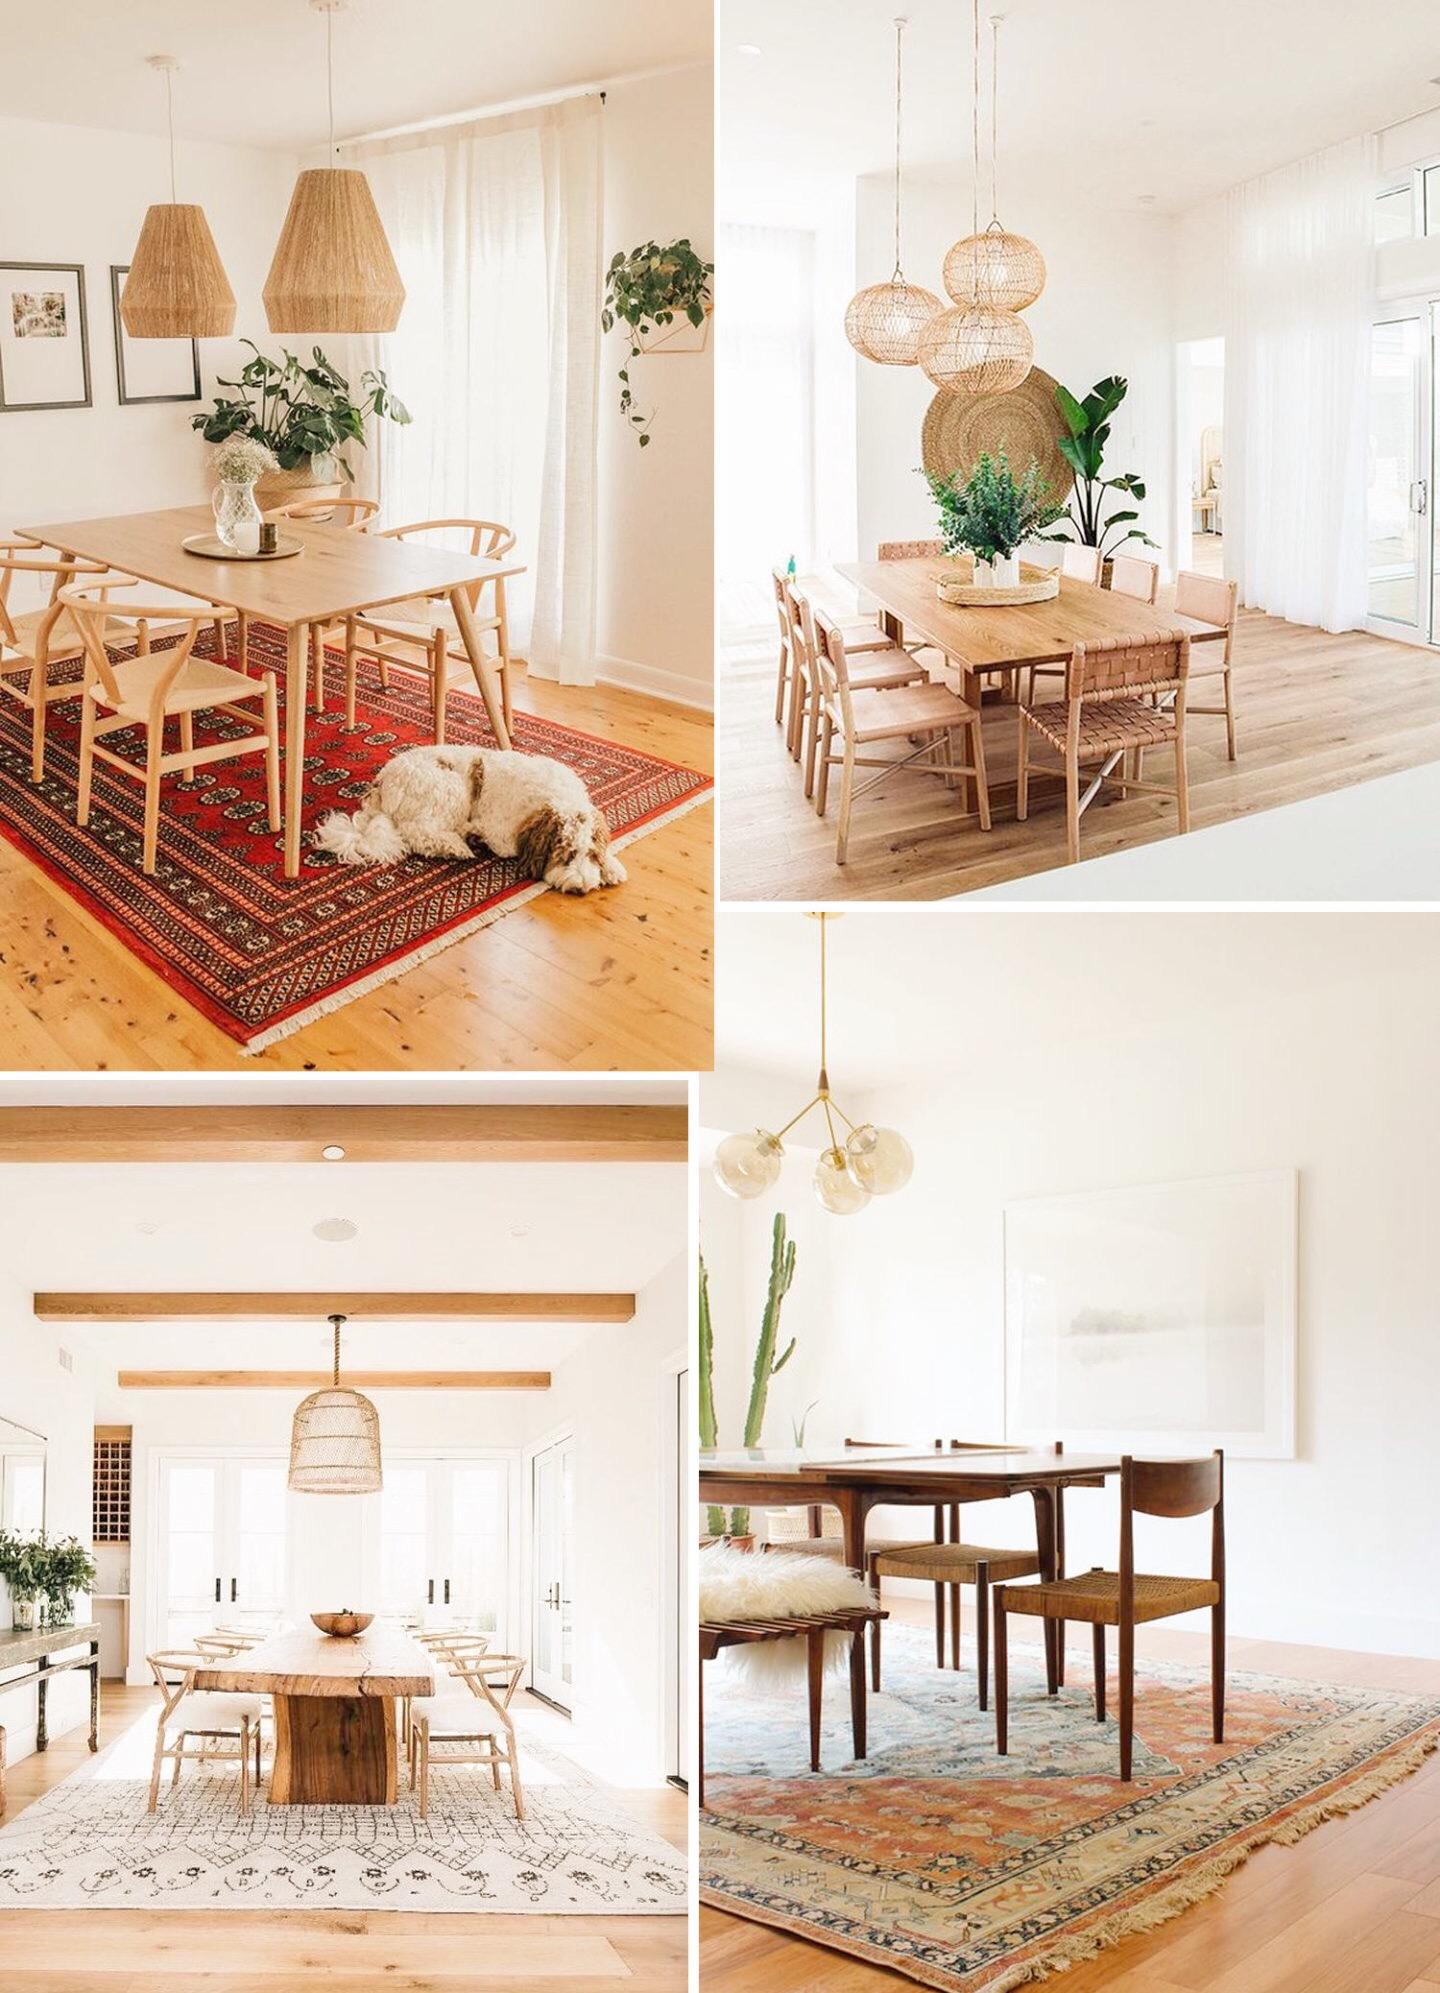 Our First House: Dining Room Inspiration